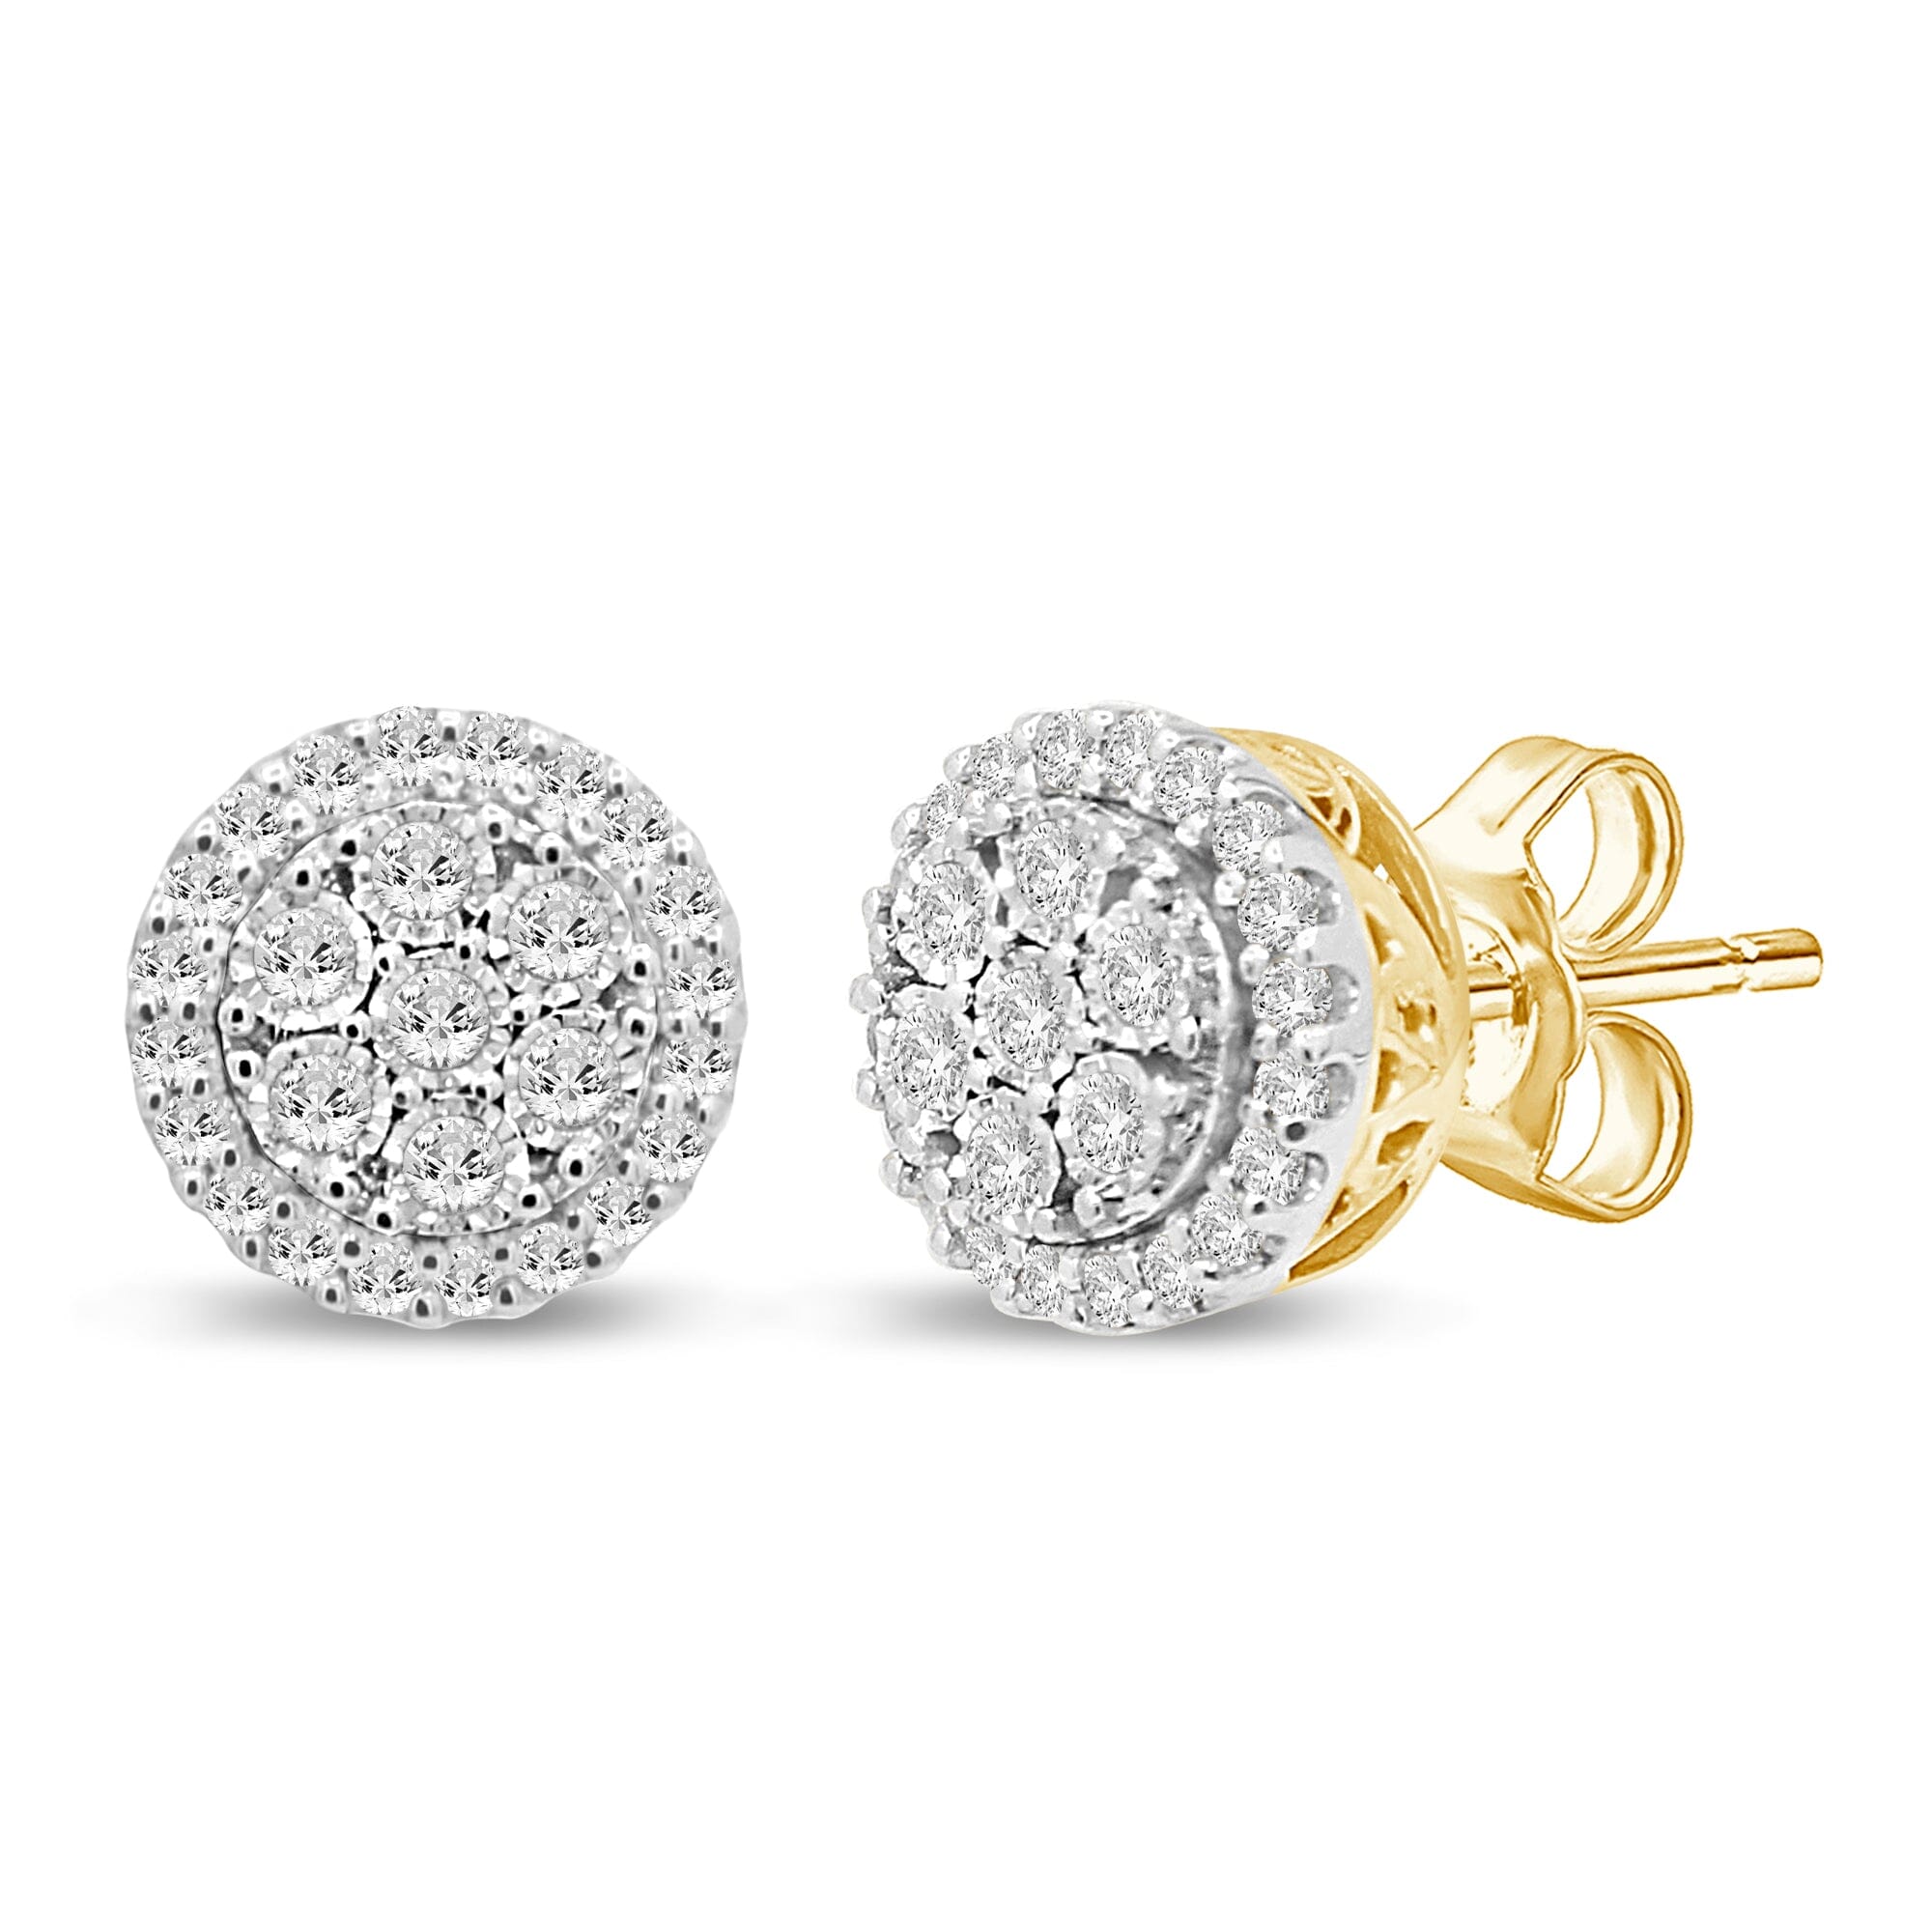 Meera Miracle Halo Stud Earrings with 0.50ct of Laboratory Grown Diamonds in 9ct Yellow Gold Earrings Bevilles 